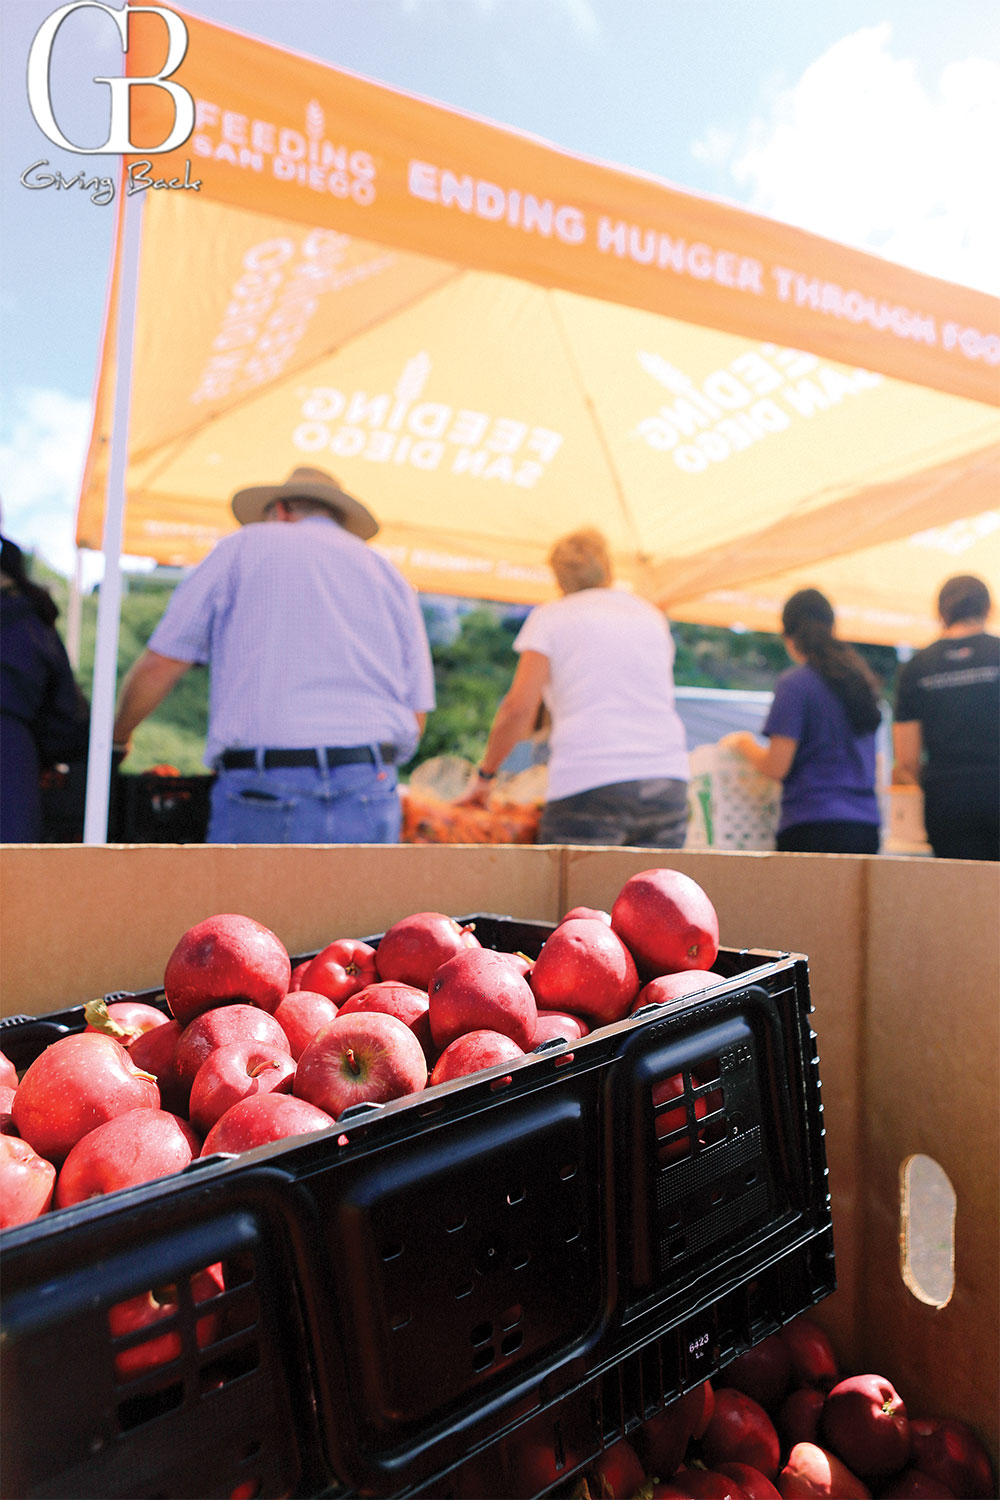 Feeding San Diego Mobile Pantry and Their Mission is Ending Hunger Through Food